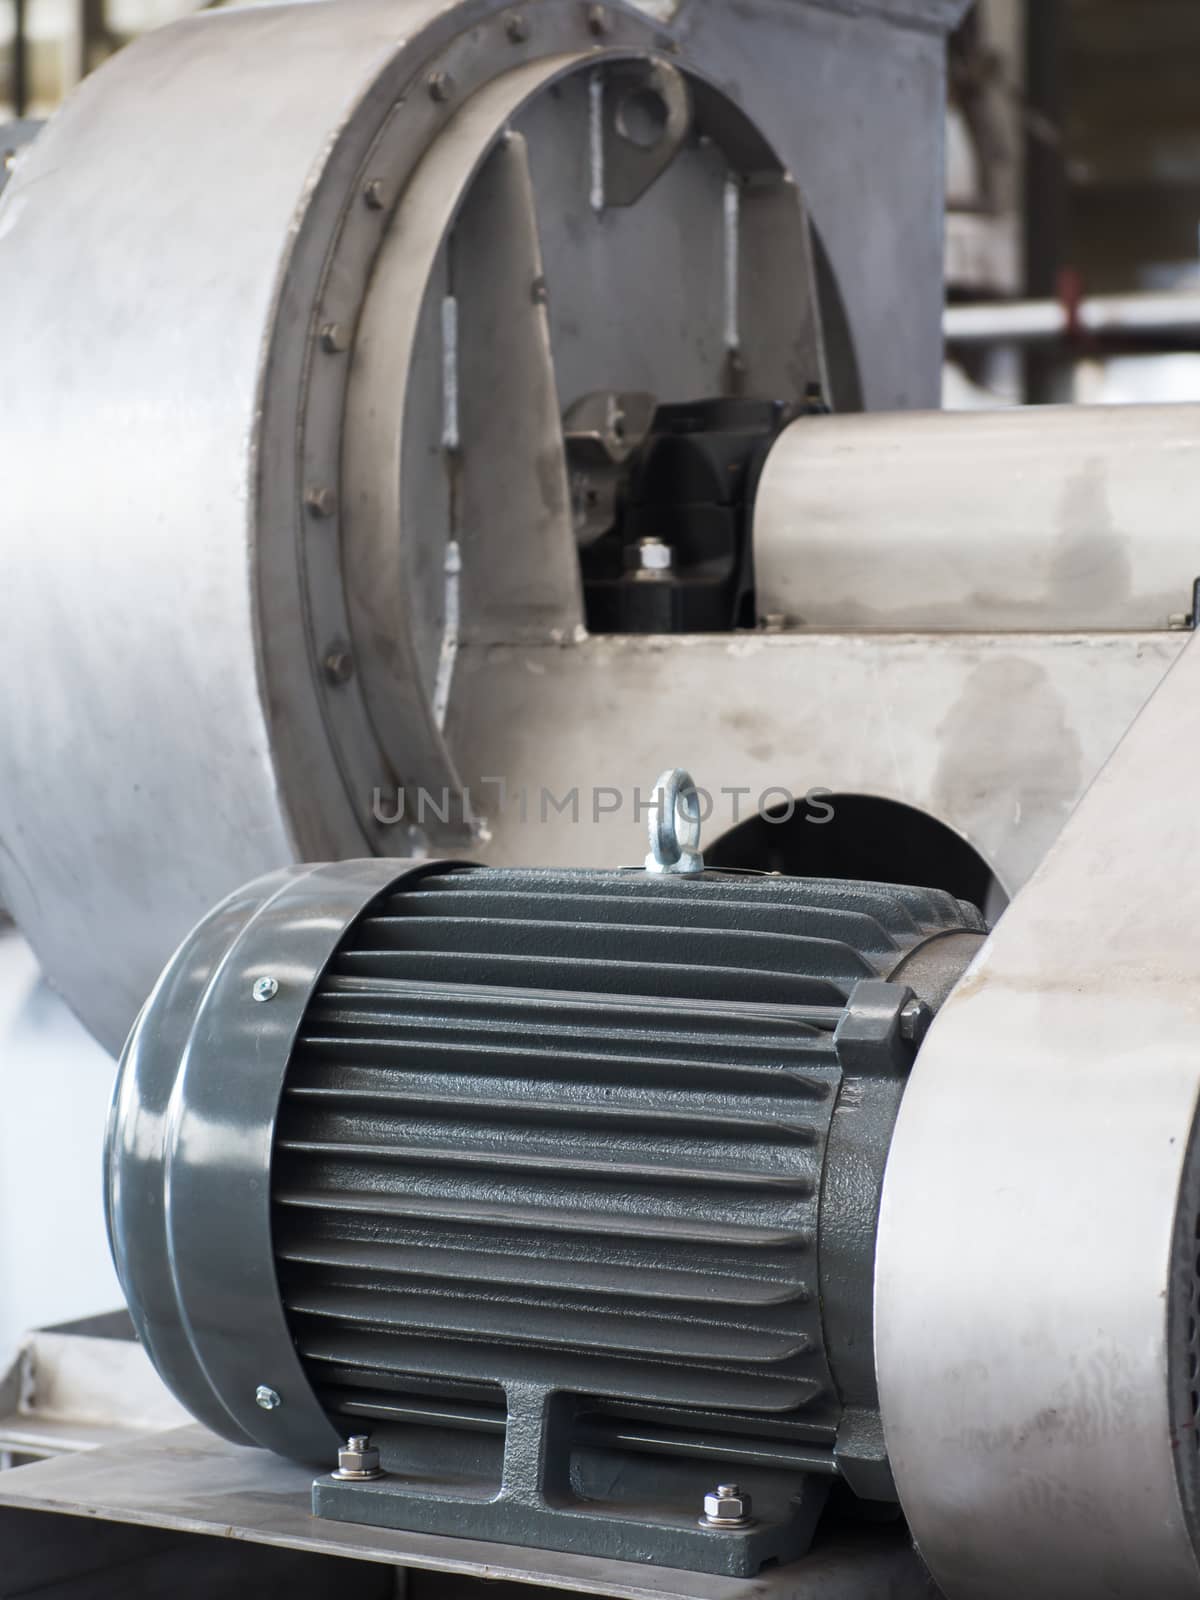 Electric motor as part of industrial ventilation system.